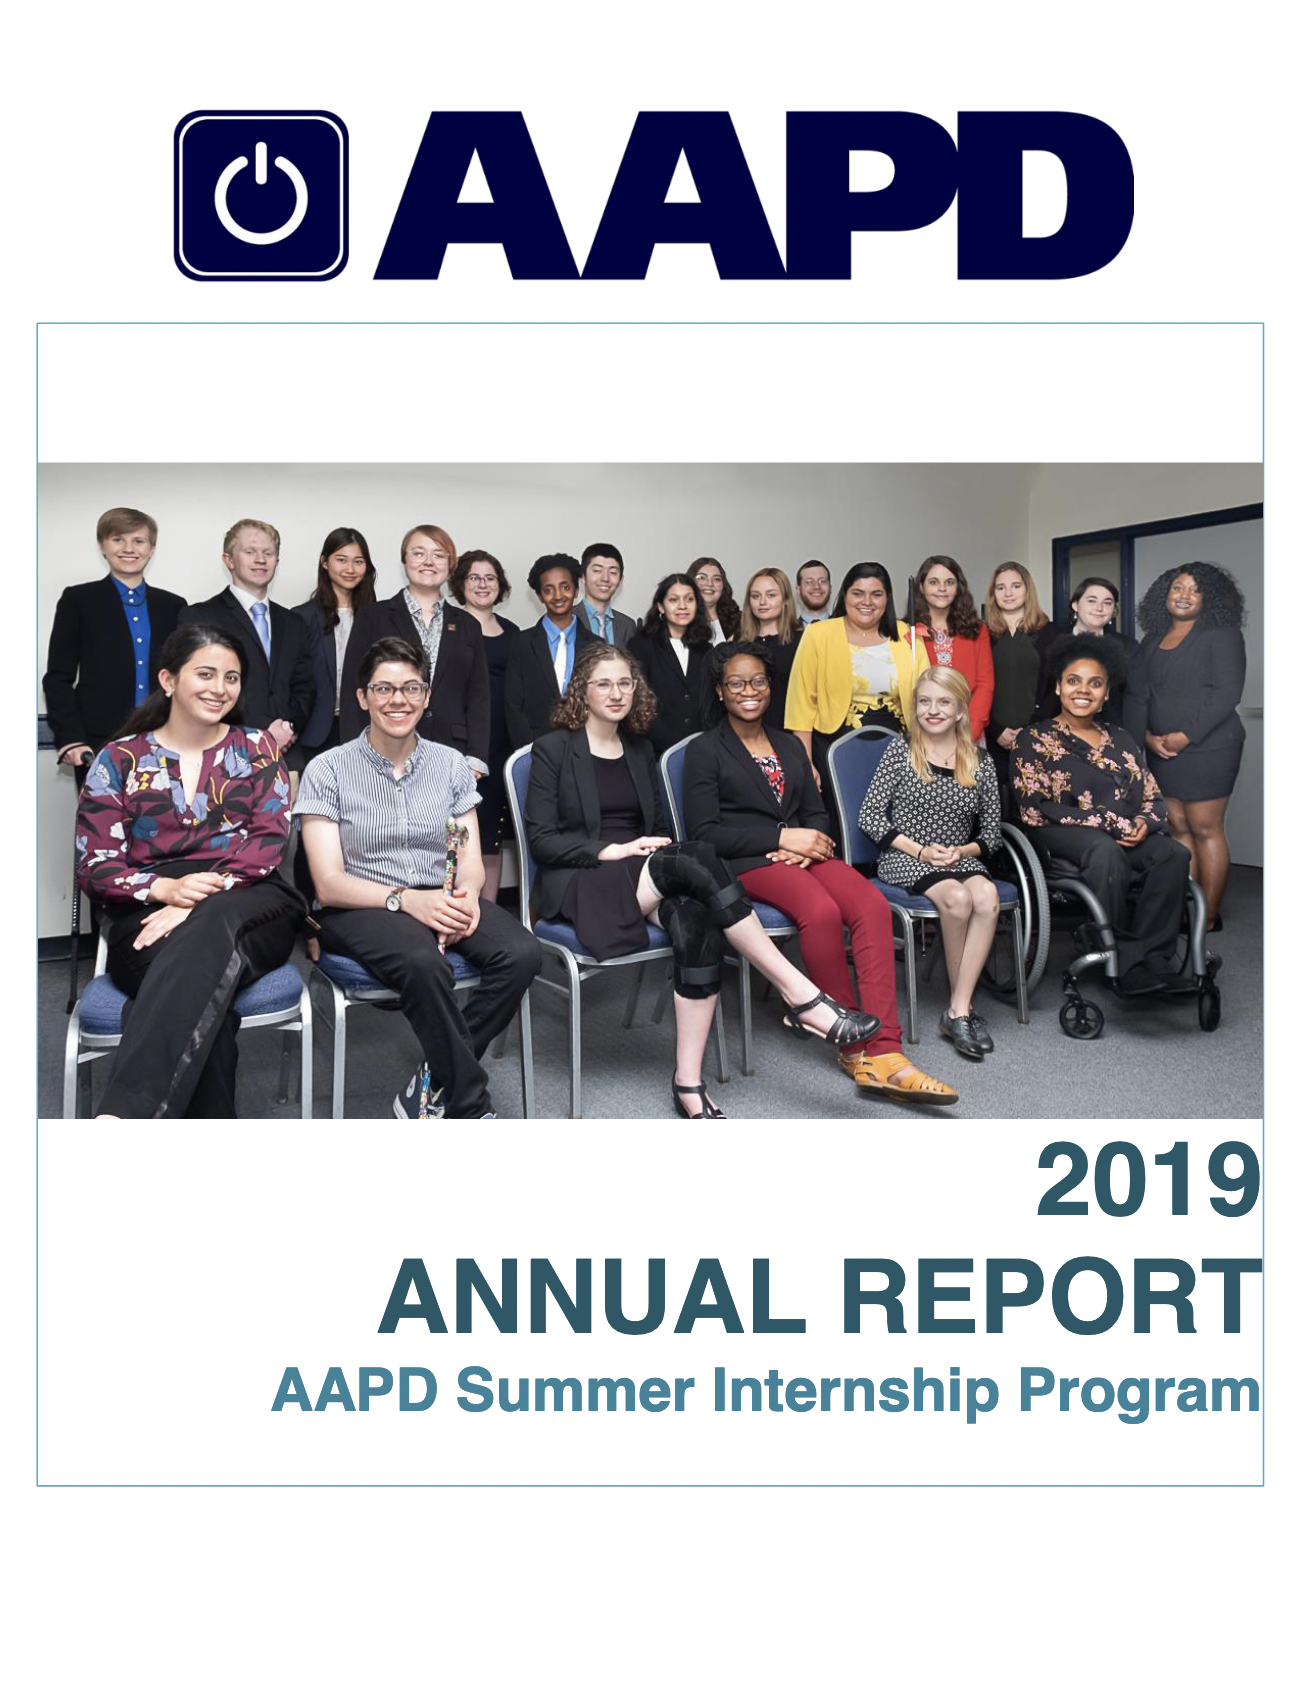 screenshot of 2019 annual report with aapd logo above image of group of people posing for photo